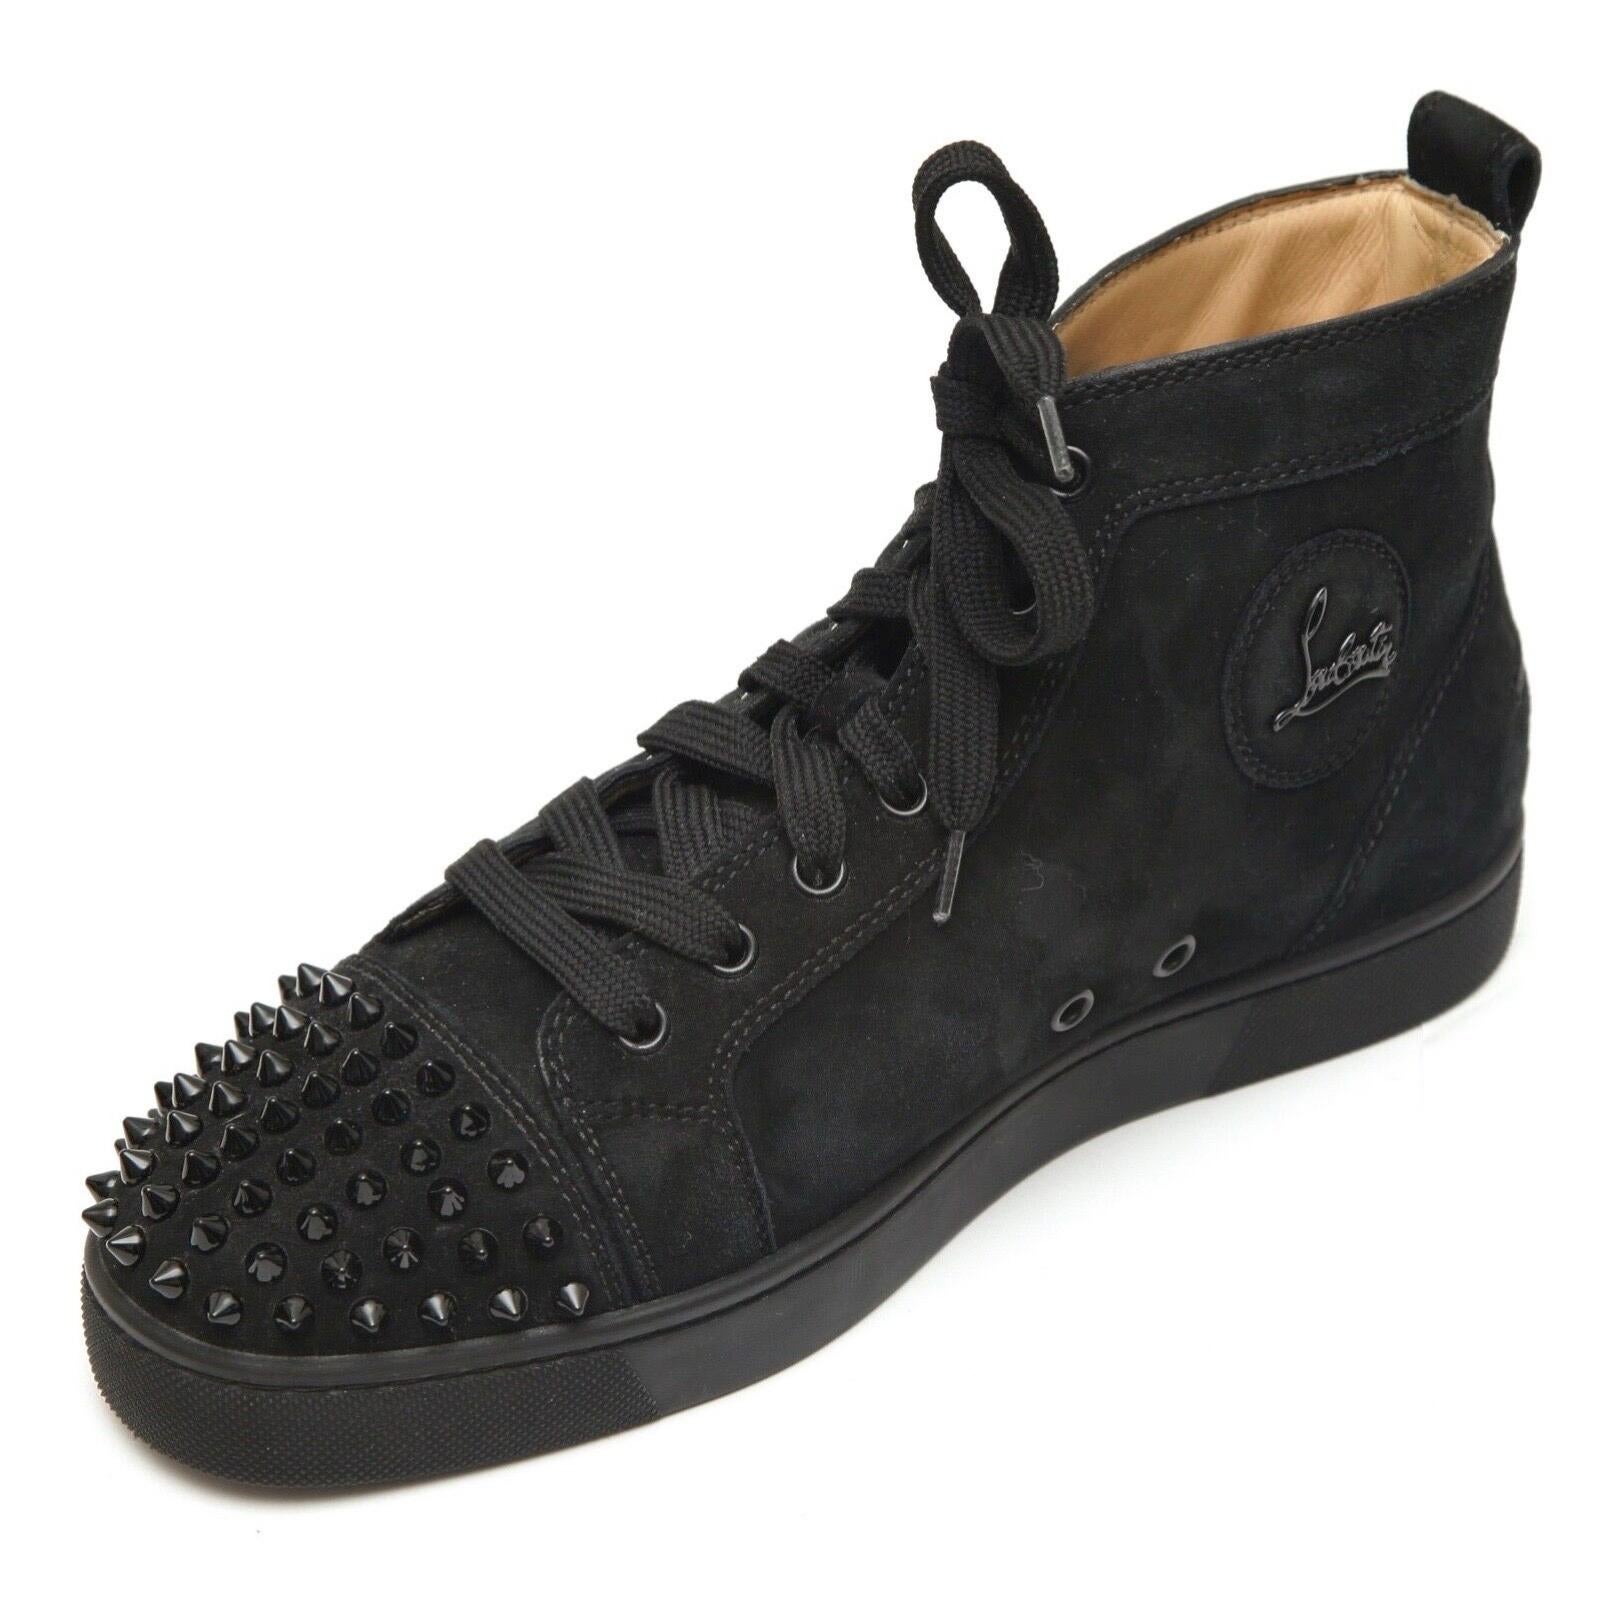 GUARANTEED AUTHENTIC CHRISTIAN LOUBOUTIN MEN'S LOU SPIKES ORLATO FLAT

Authenticated by Authenticatefirst

Design:
- High top sneaker style in black suede.
- Black spike rounded toe.
- Lace up closure.
- Leather lining.
- Red leather sole.
- Comes